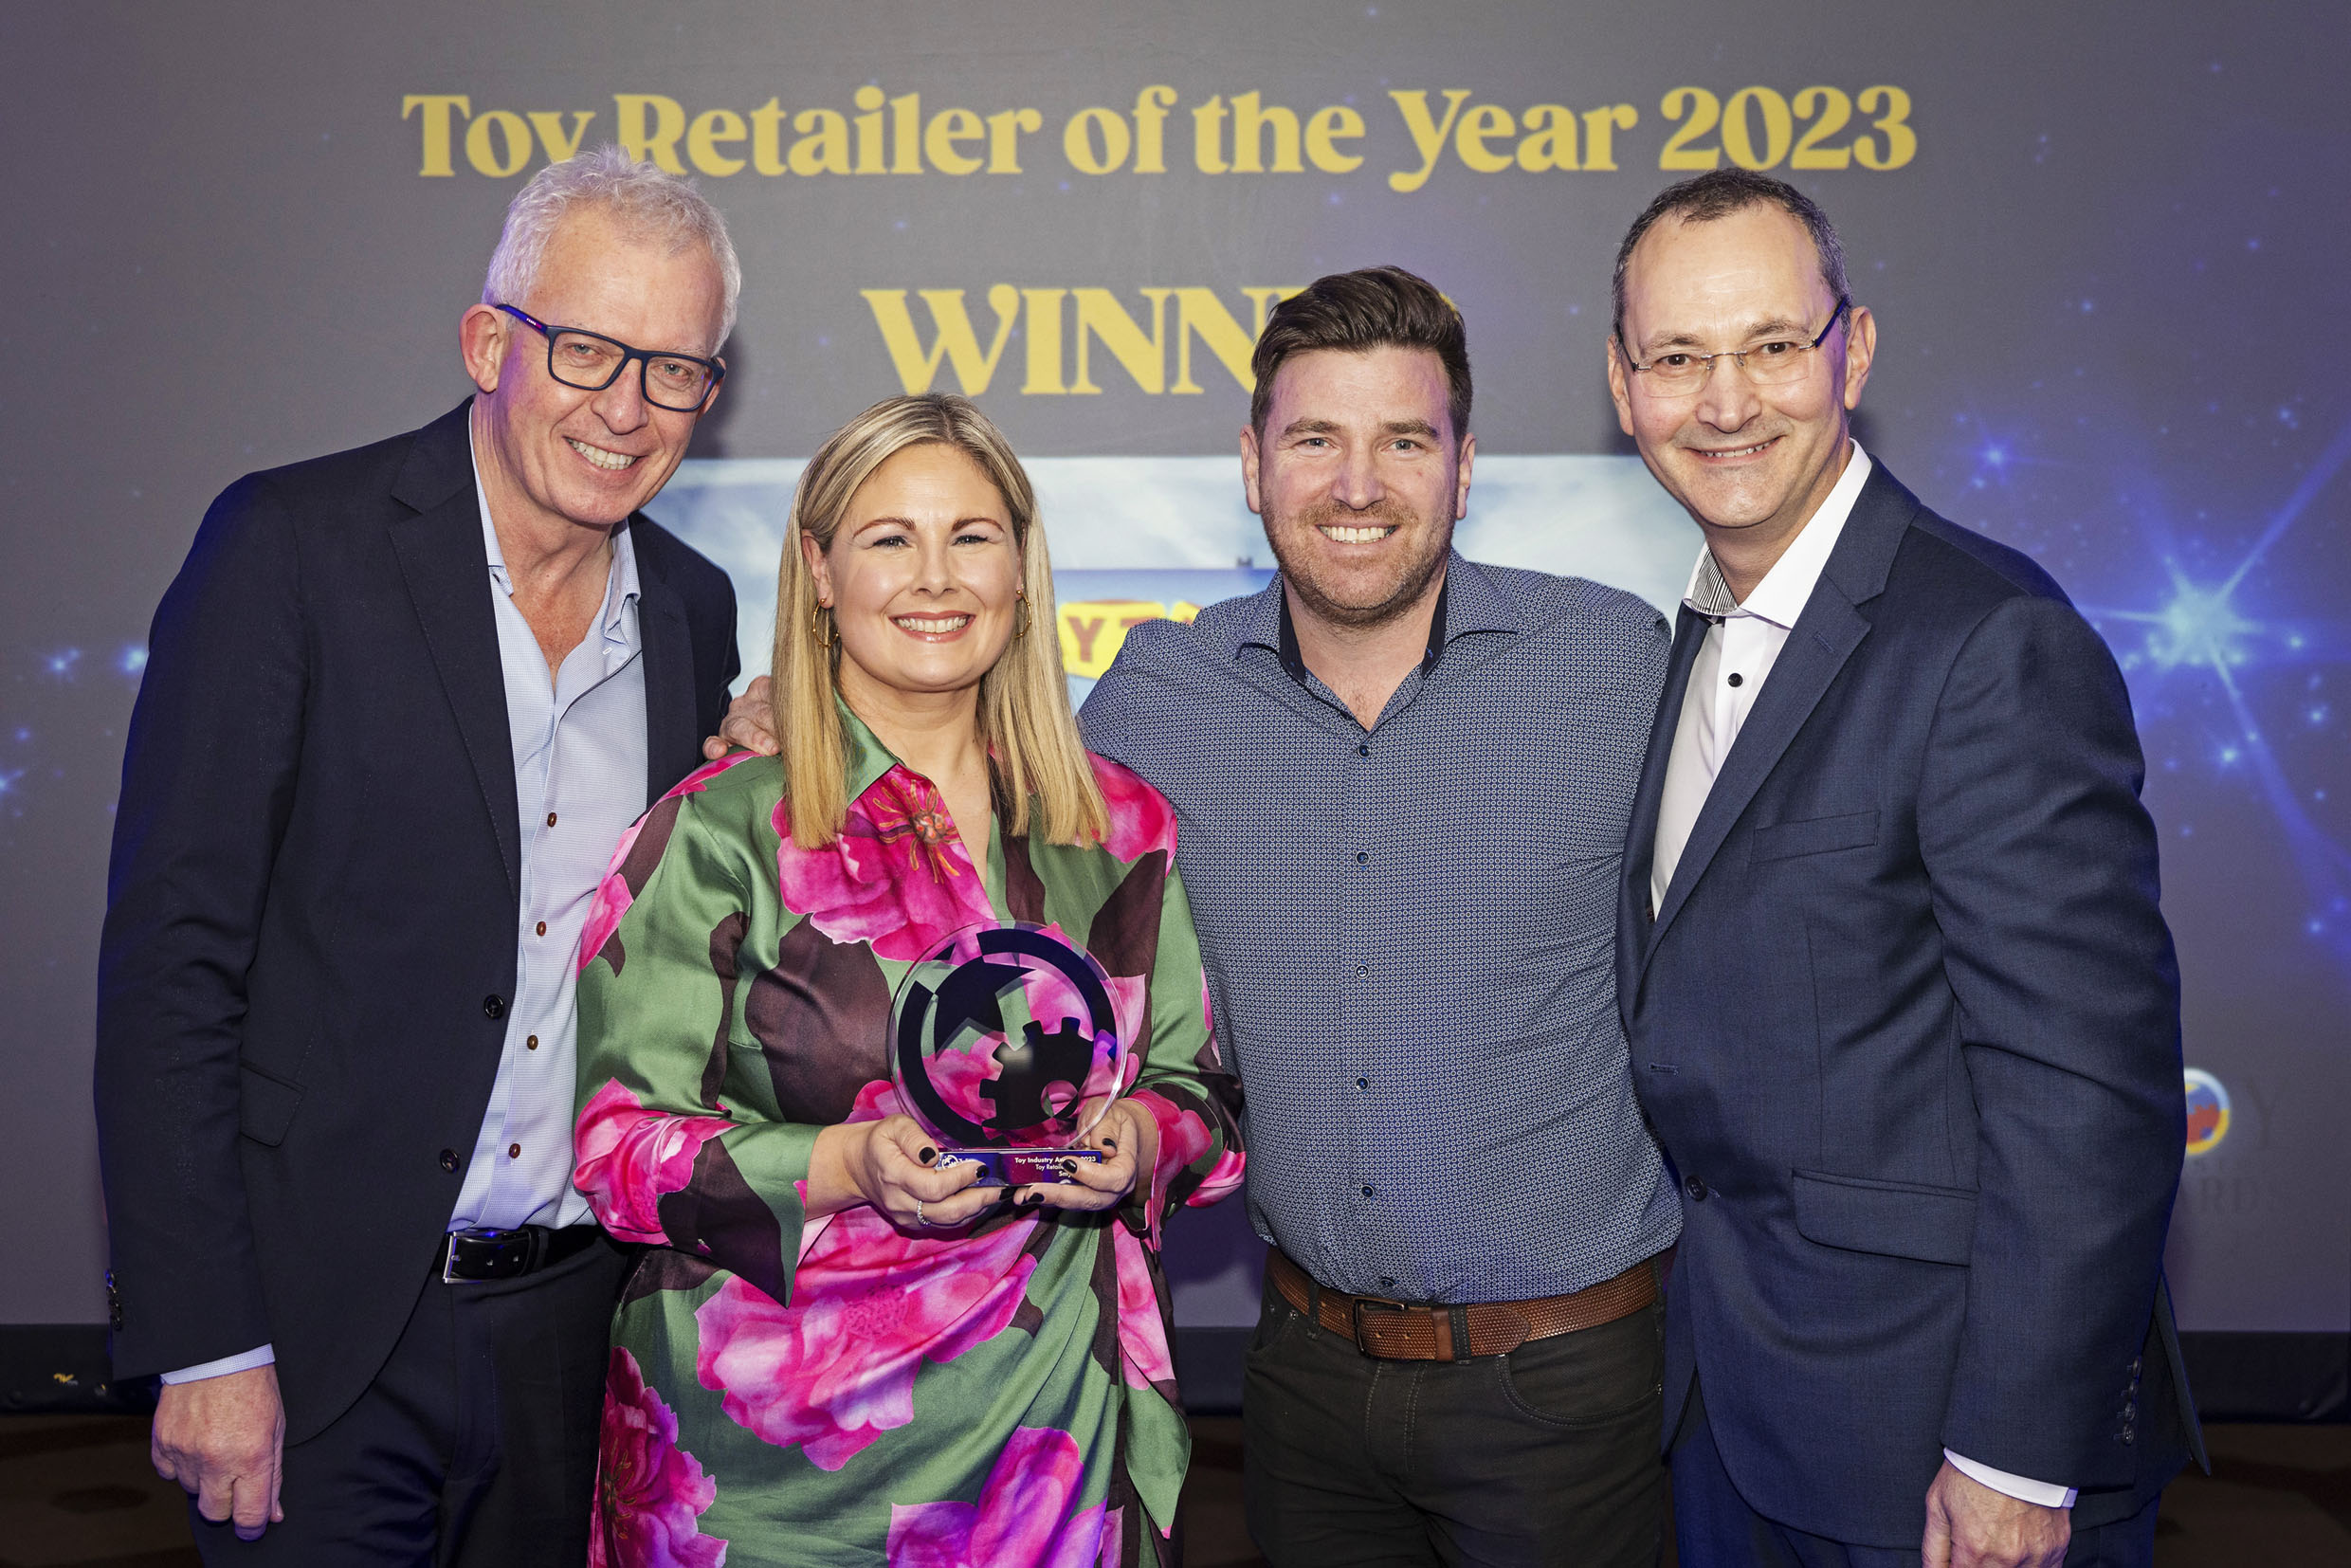 Toy Industry Awards Winners 2023 announced